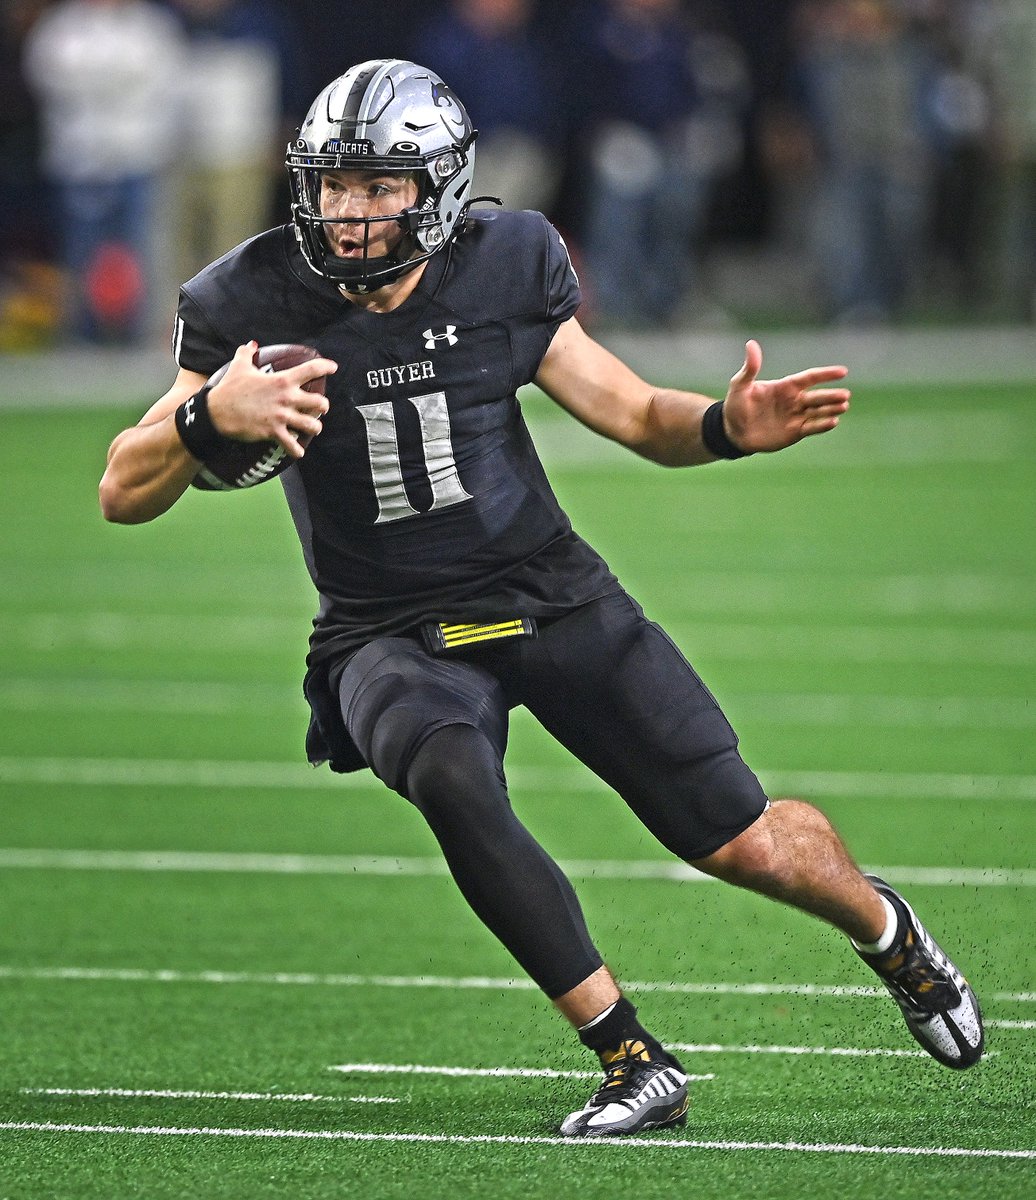 Guyer alumnus Jackson Arnold will get a crack at beginning Oklahoma's next era Friday when the standout QB makes his first collegiate start. In the process, the former area star gets a chance to begin writing another chapter in his storied career. dentonrc.com/sports/high_sc…